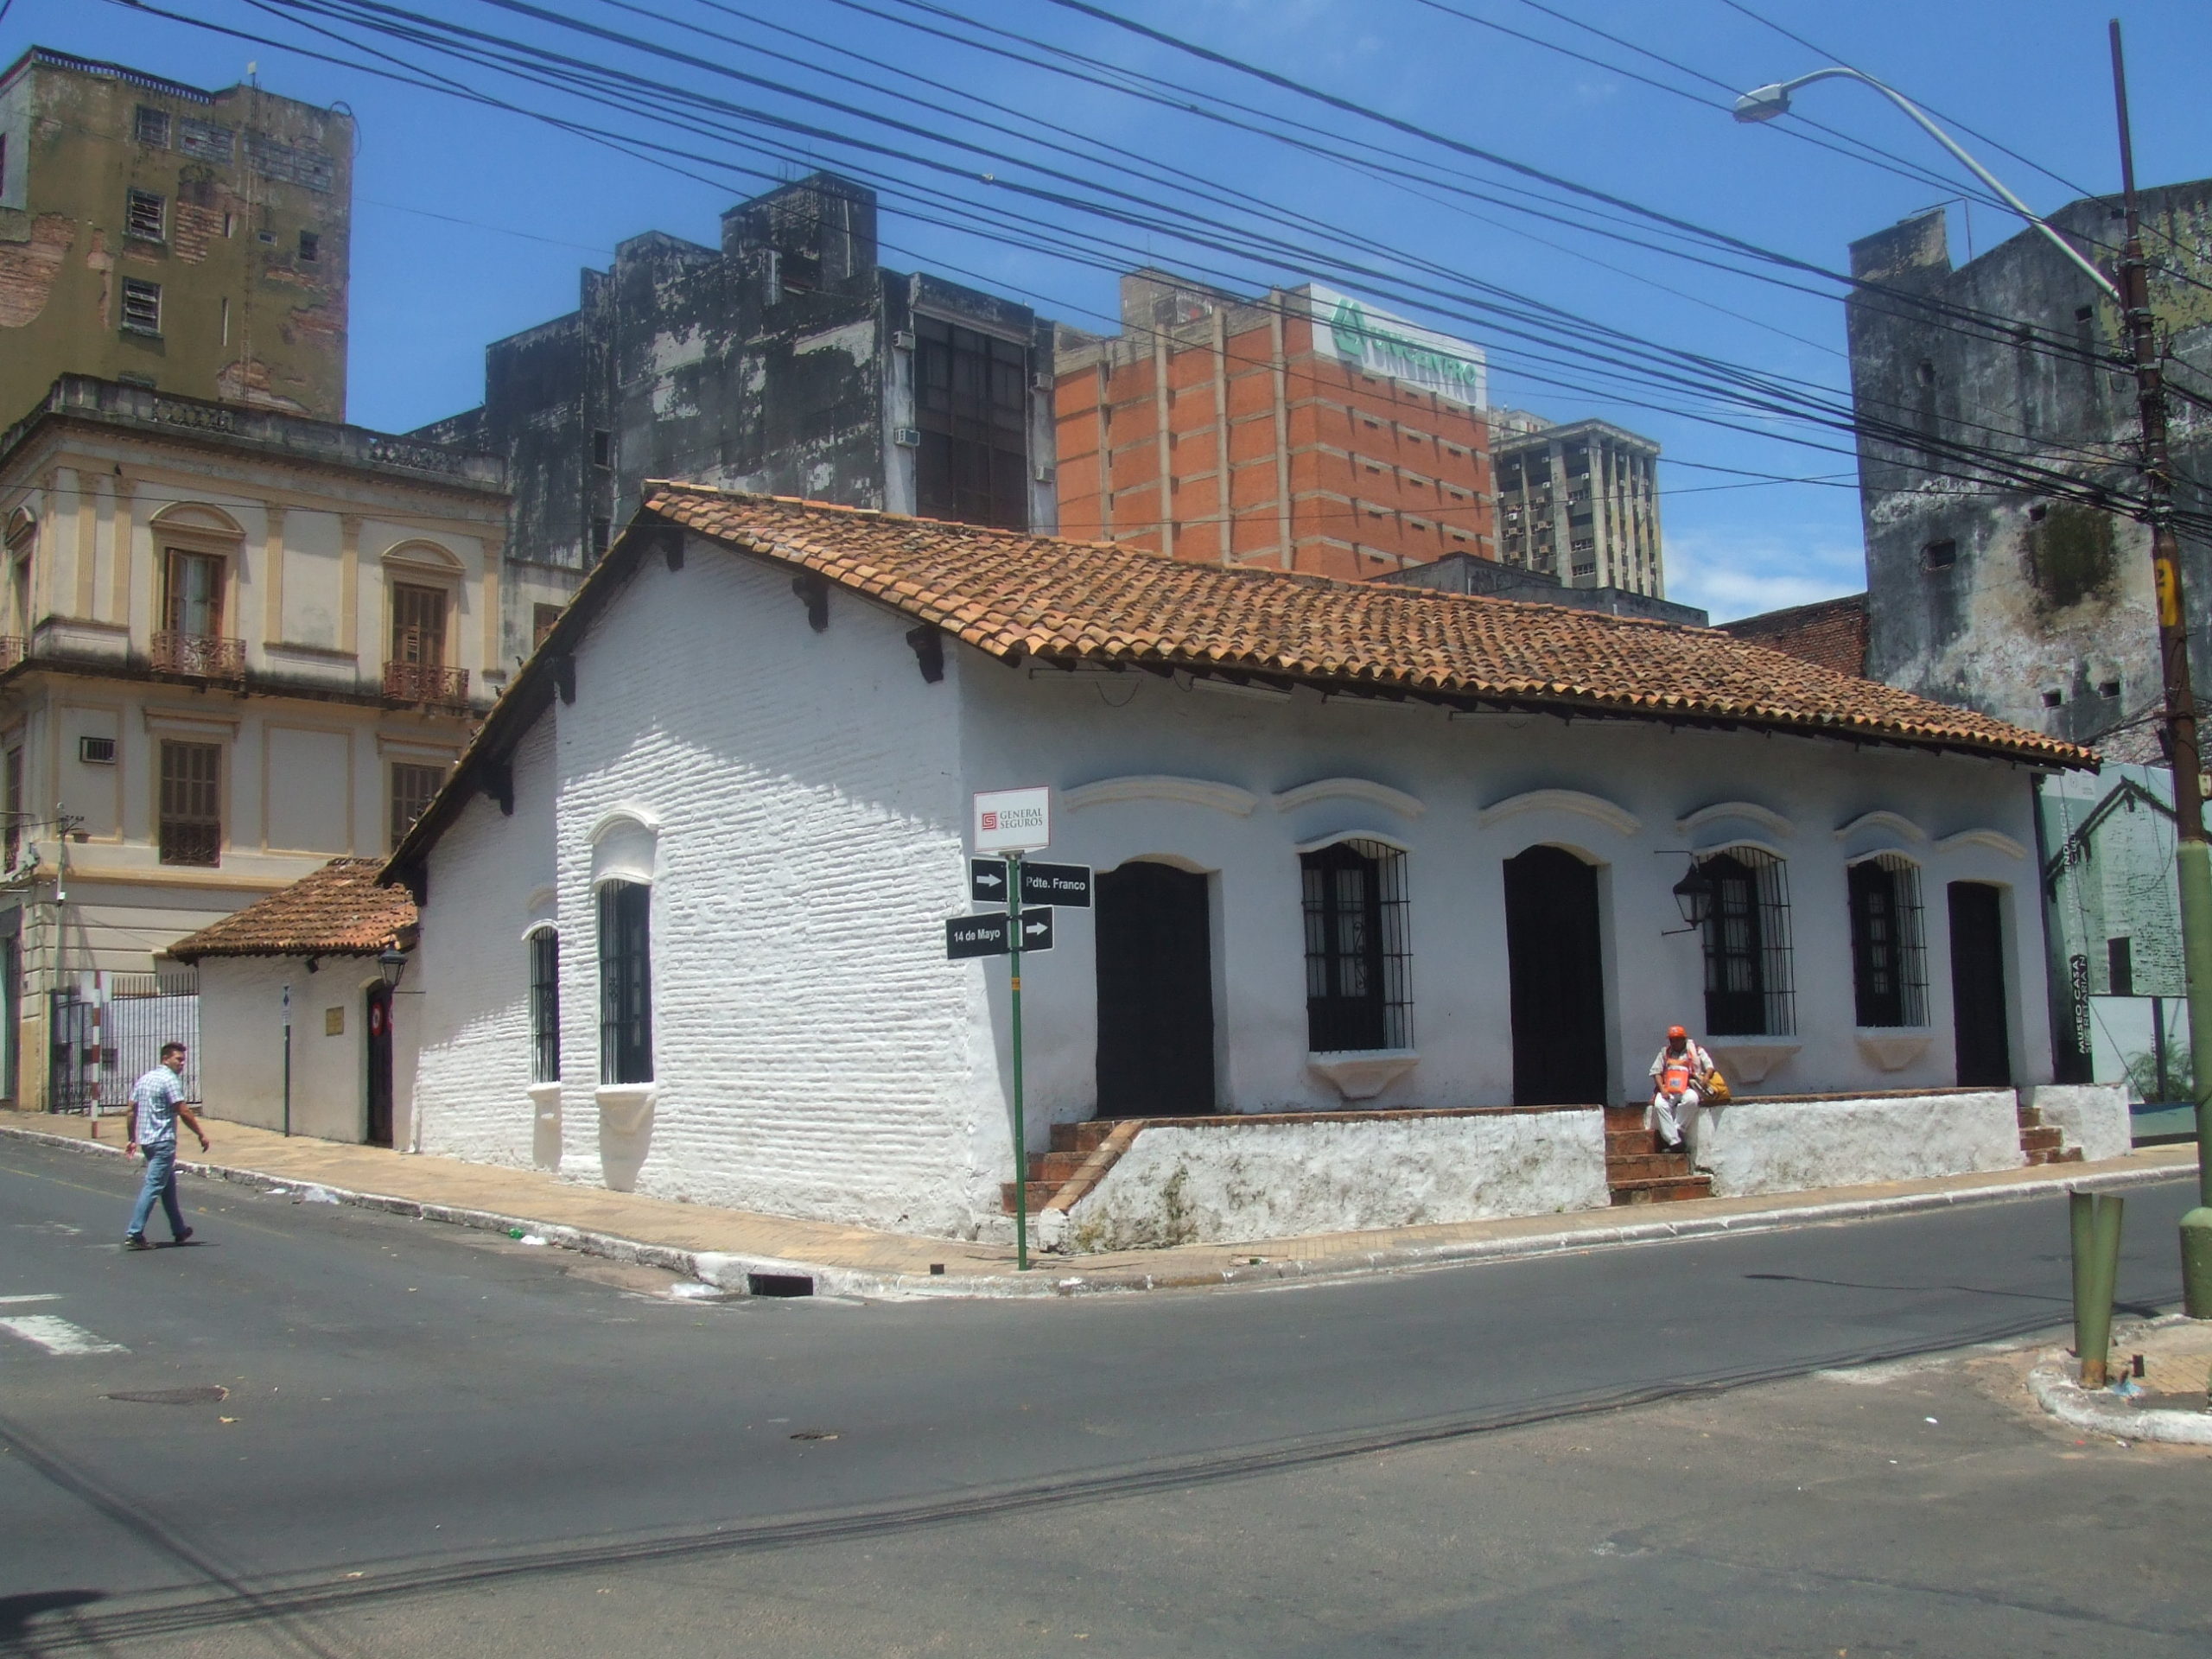 The birthplace of Paraguayan independence